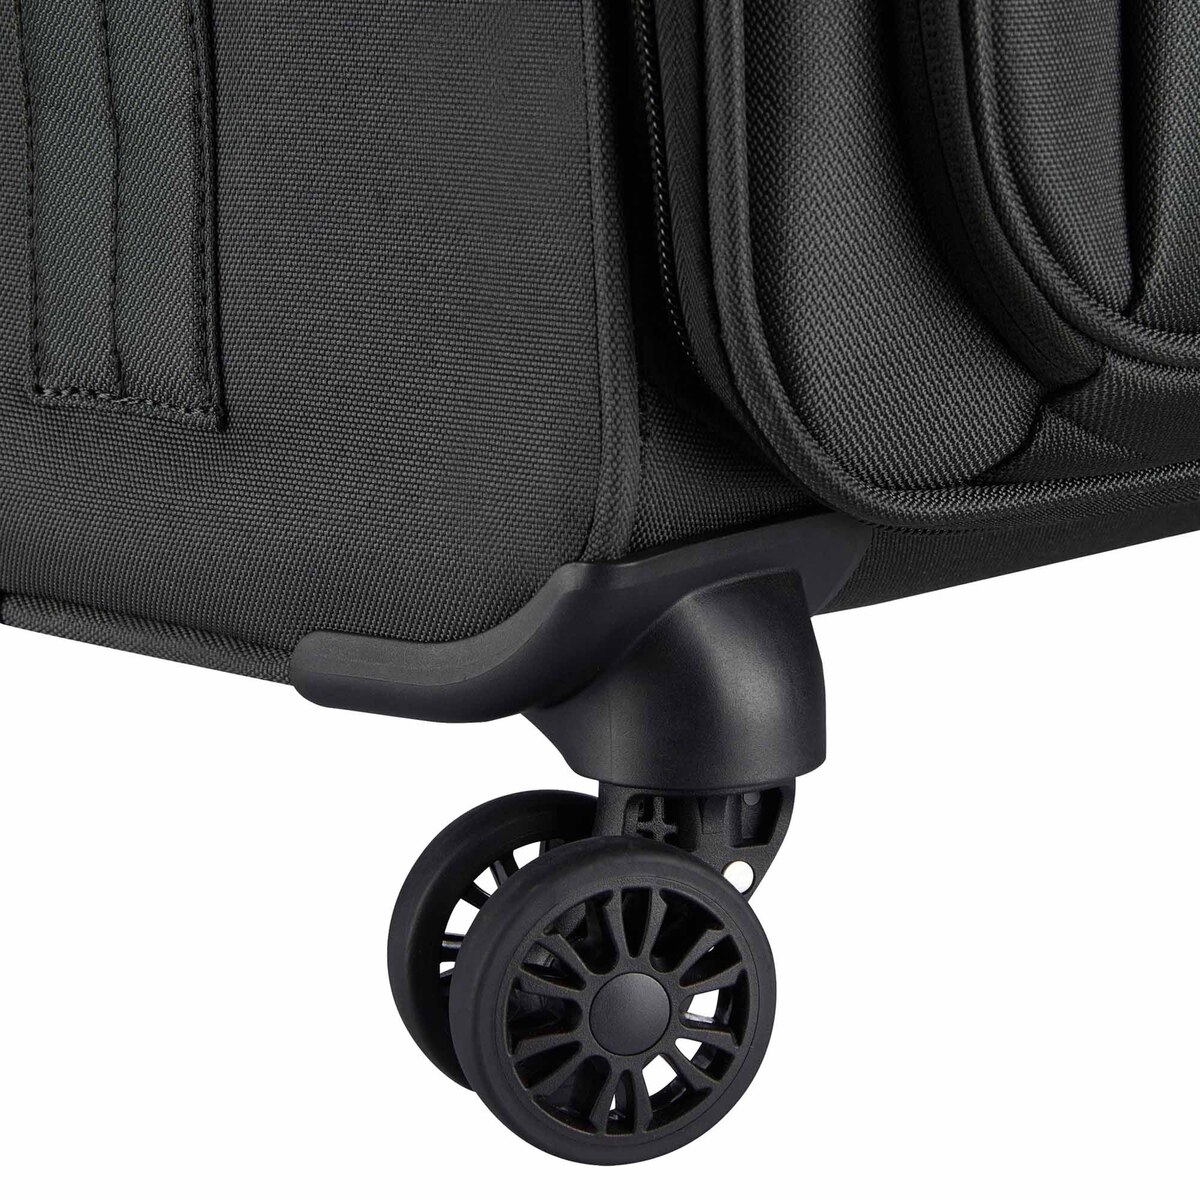 Delsey Pin Up 6 Soft Trolley, 4 Double Wheels, 78 cm, Black, 3430821 ...